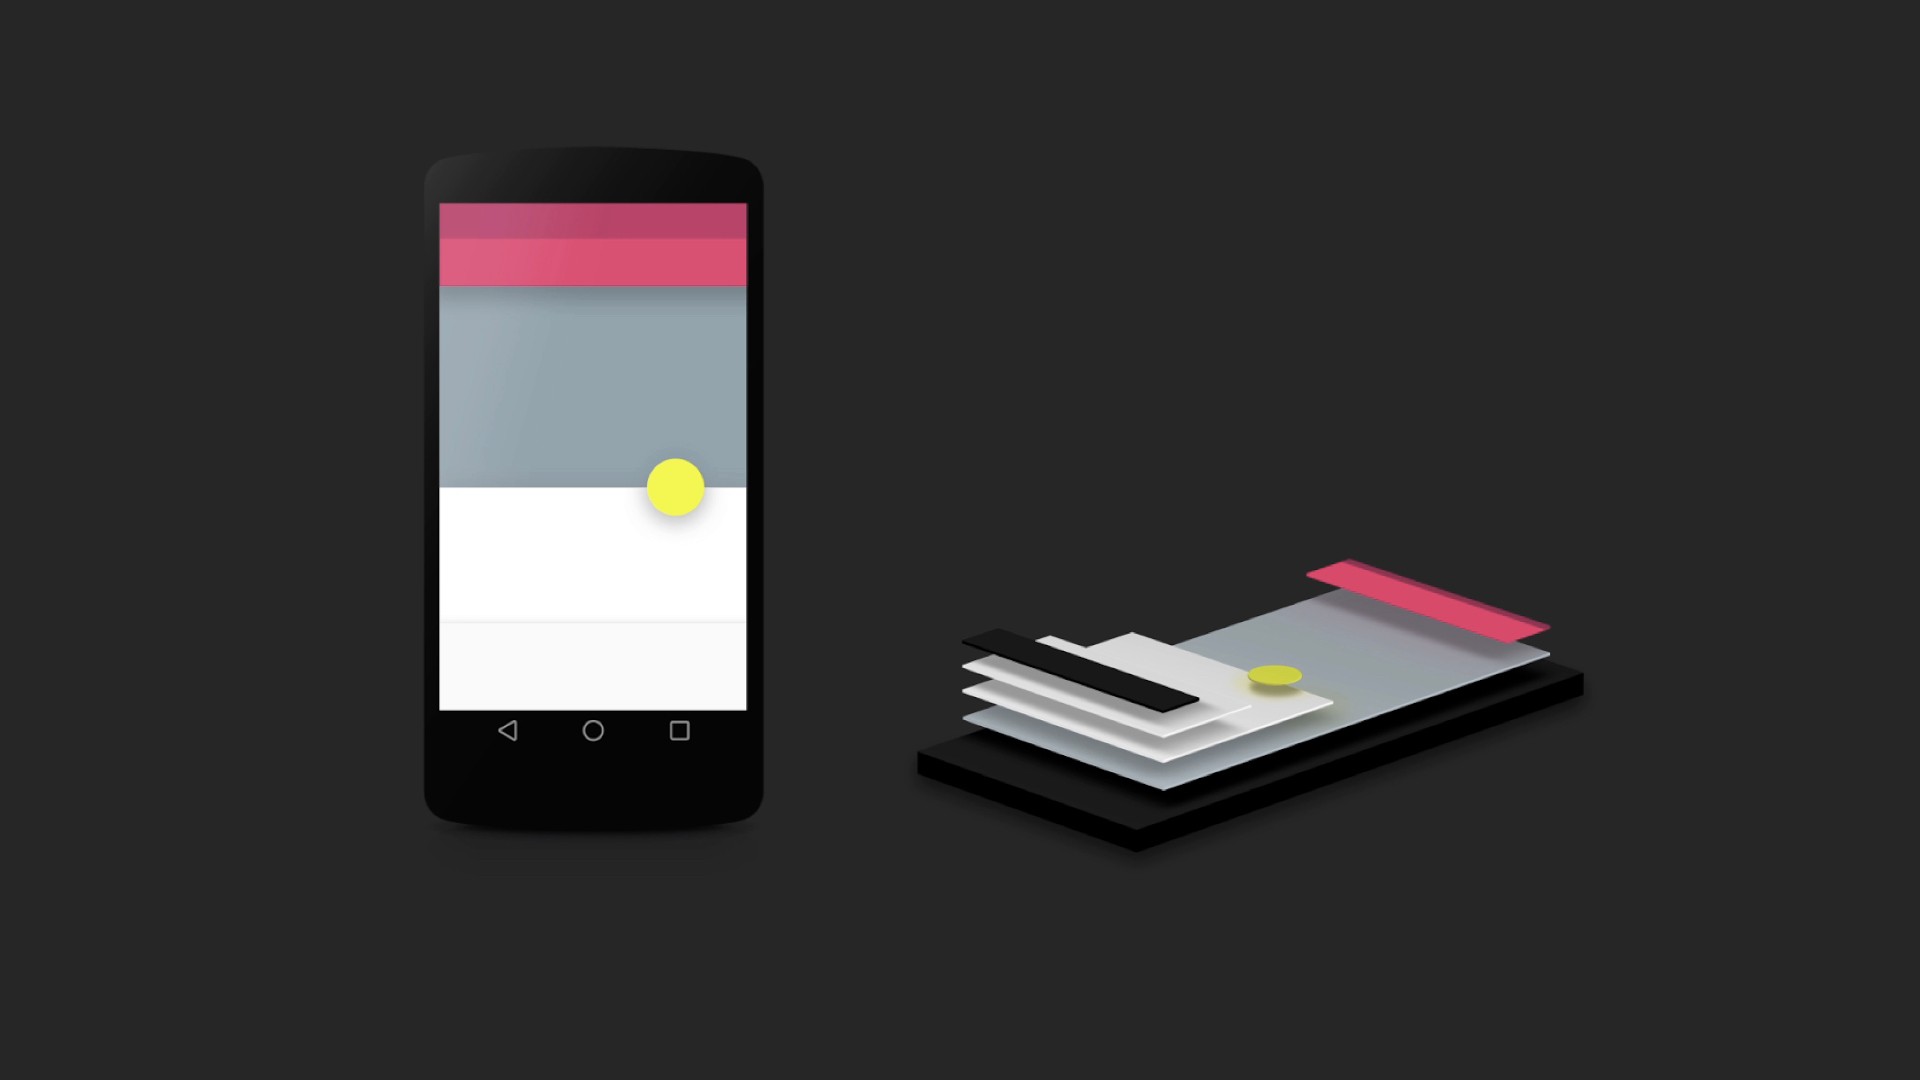 Two views of the same user interface made out of Material Design, a flat regular one and a 3D one that show the depths of the different elements.